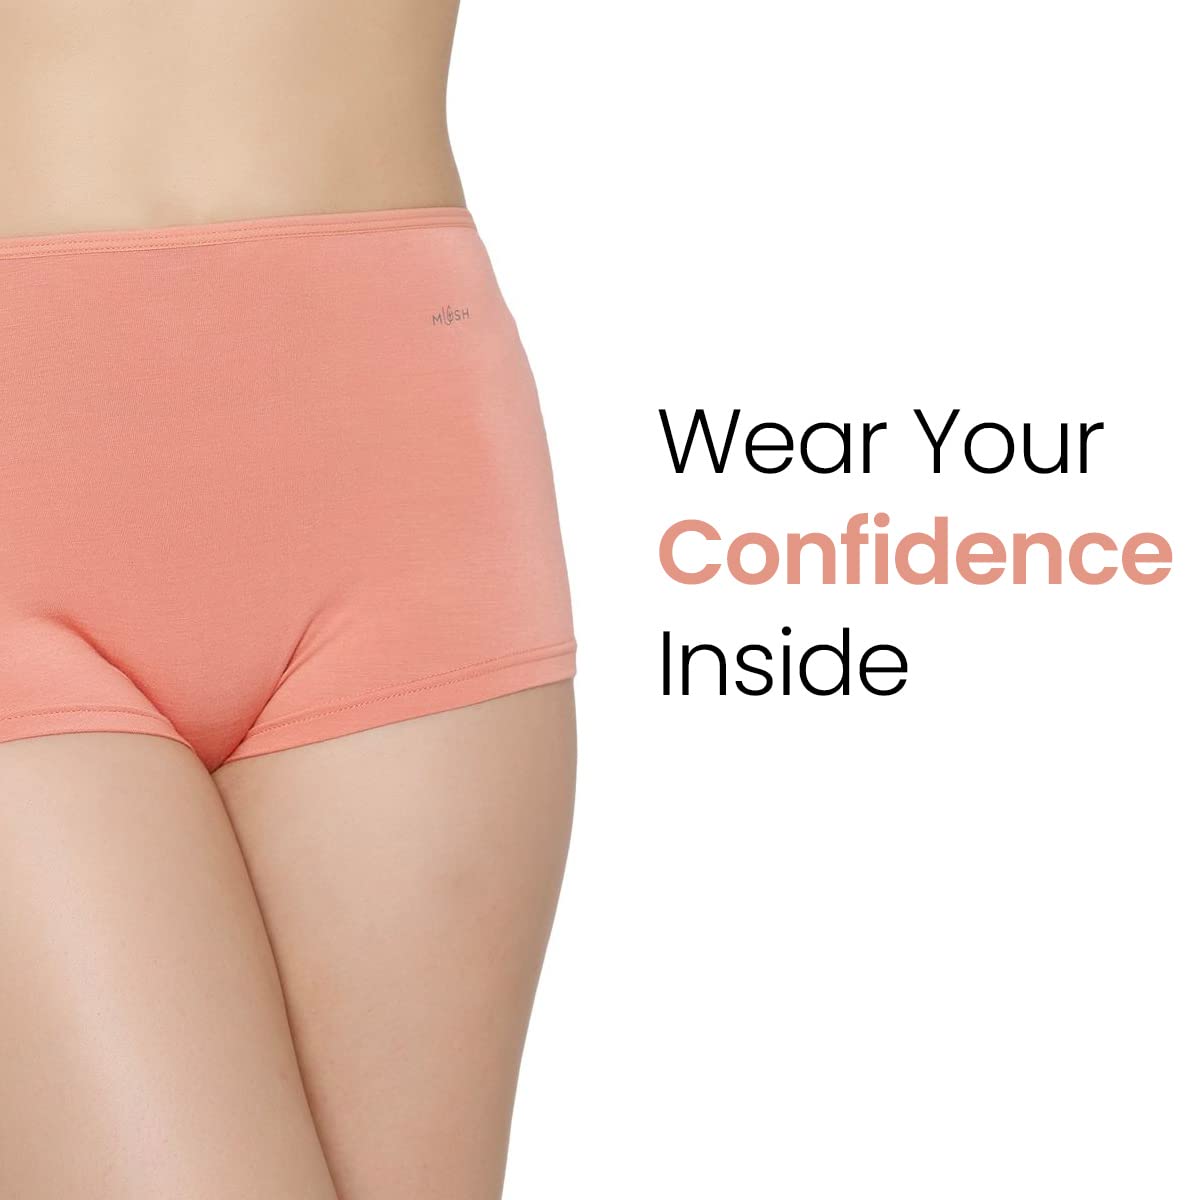 Mush Bamboo Boyshort Panties for Women | Ultra Soft Underwear Breathable, Anti-Odor, Seamless & All Day Comfort Pack of 2